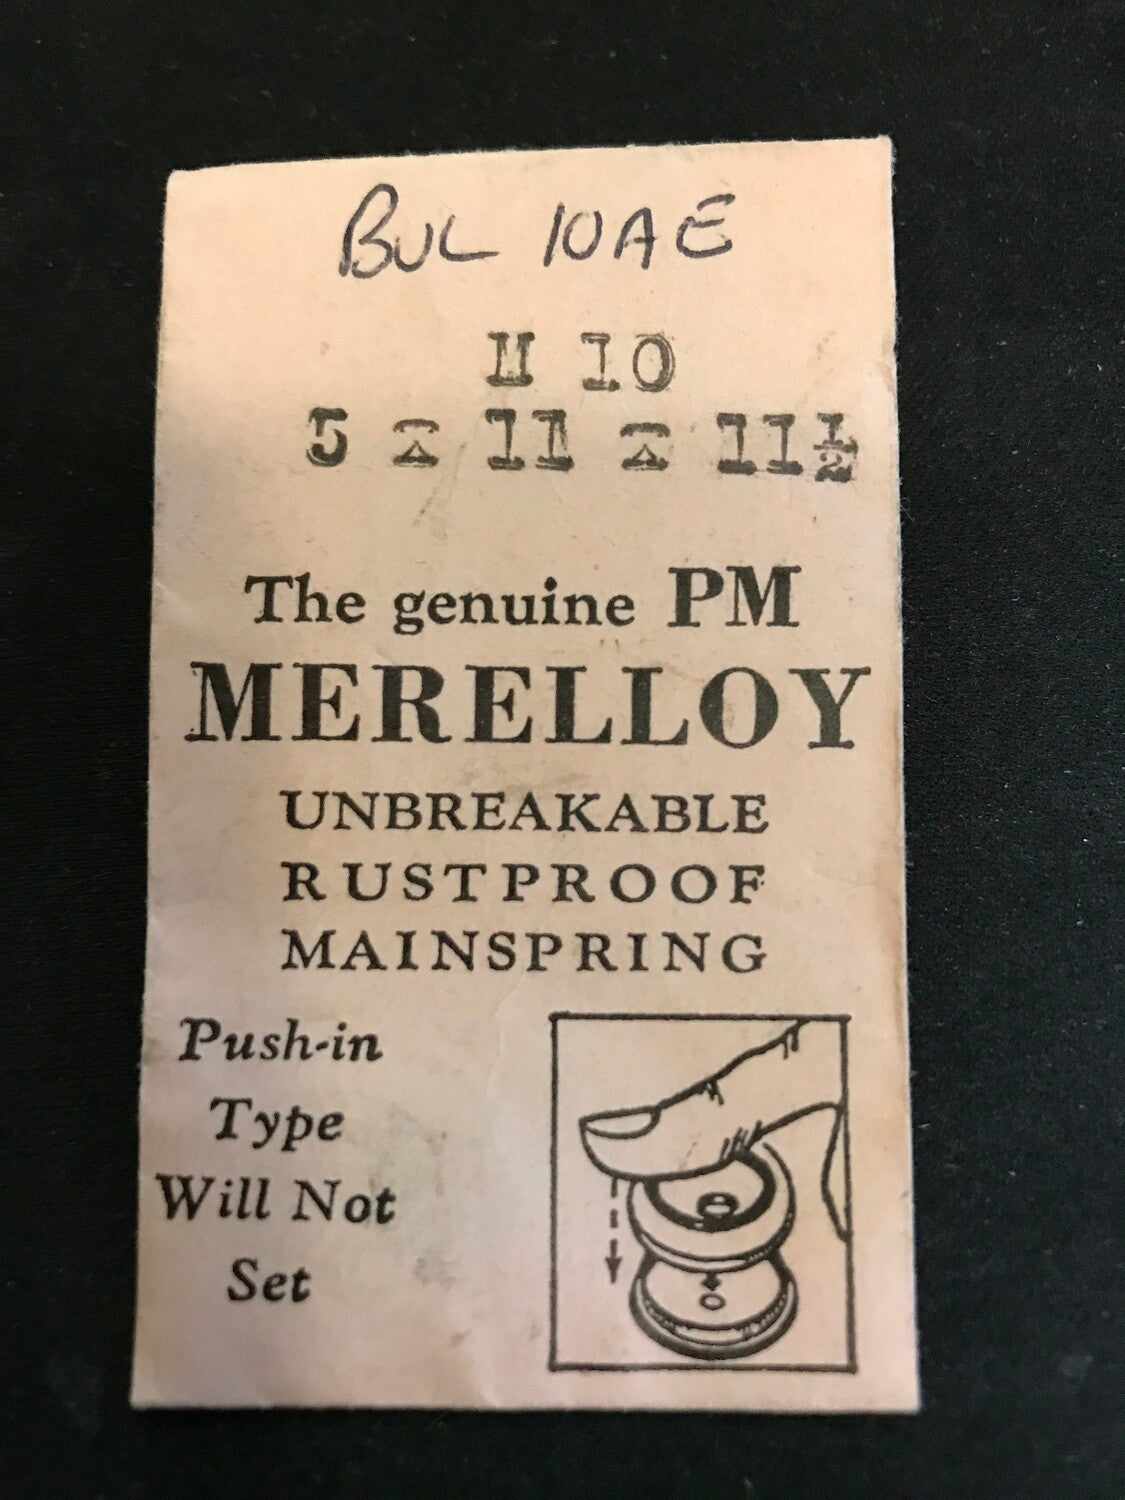 PM Merelloy Mainspring M10 for Bulova 10AN, 10AE - Alloy